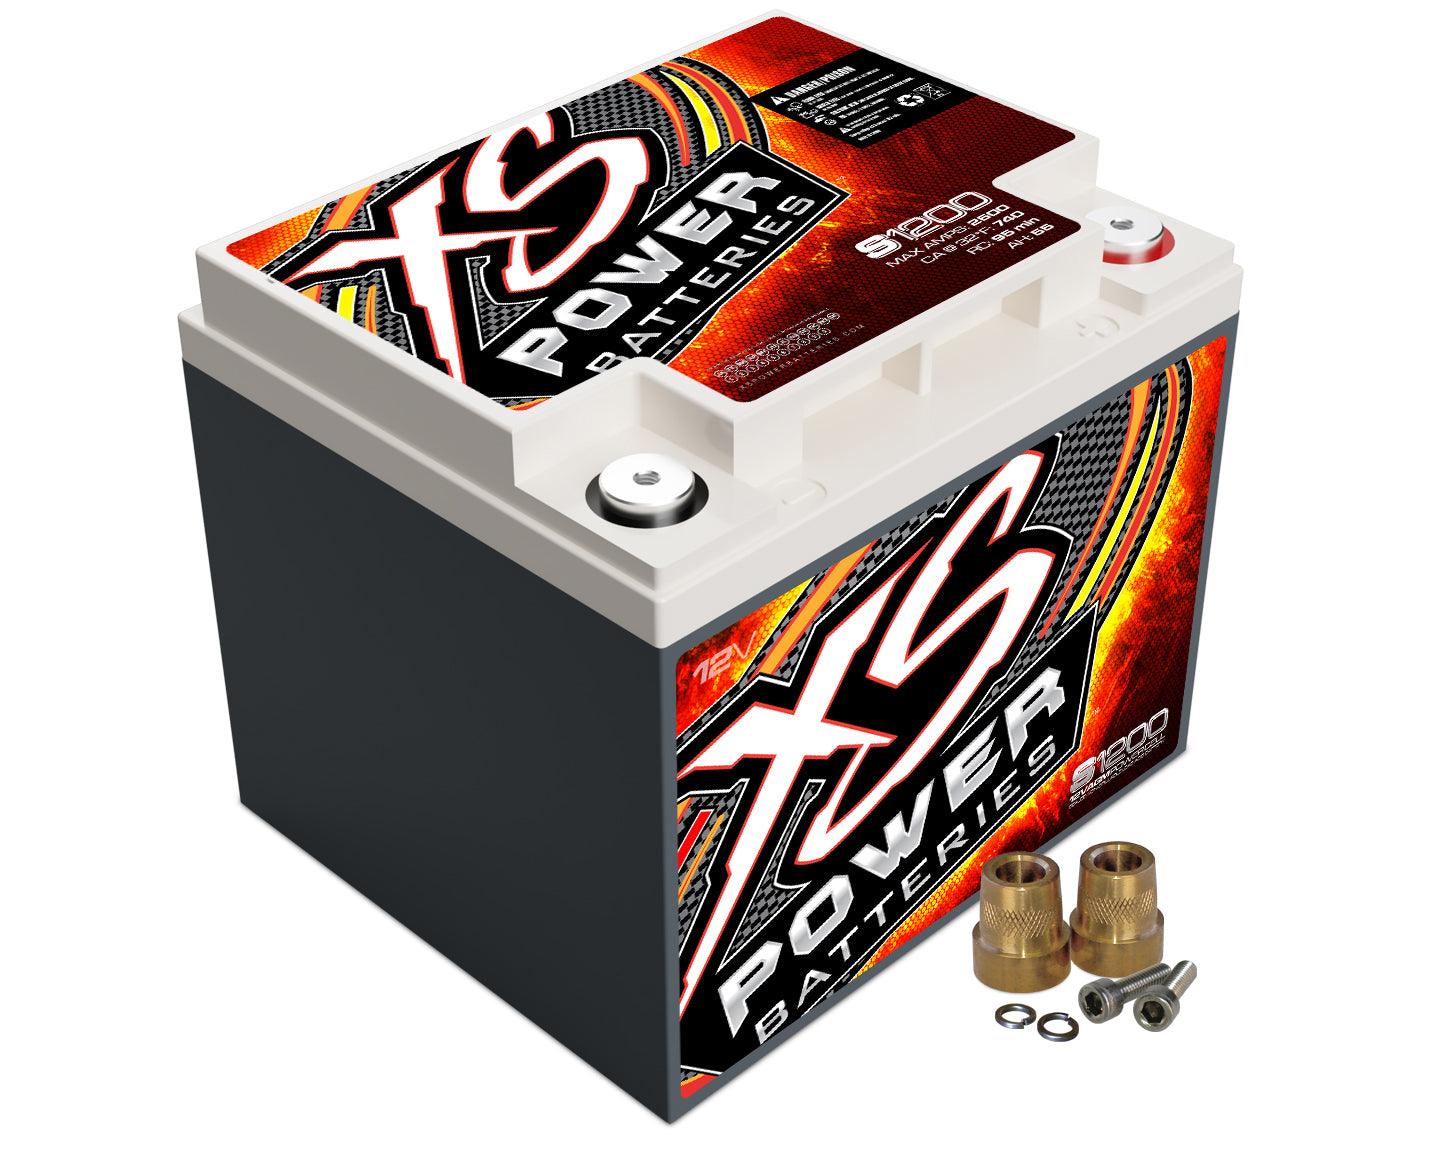 XS Power AGM Battery 12V 725A CA - Burlile Performance Products